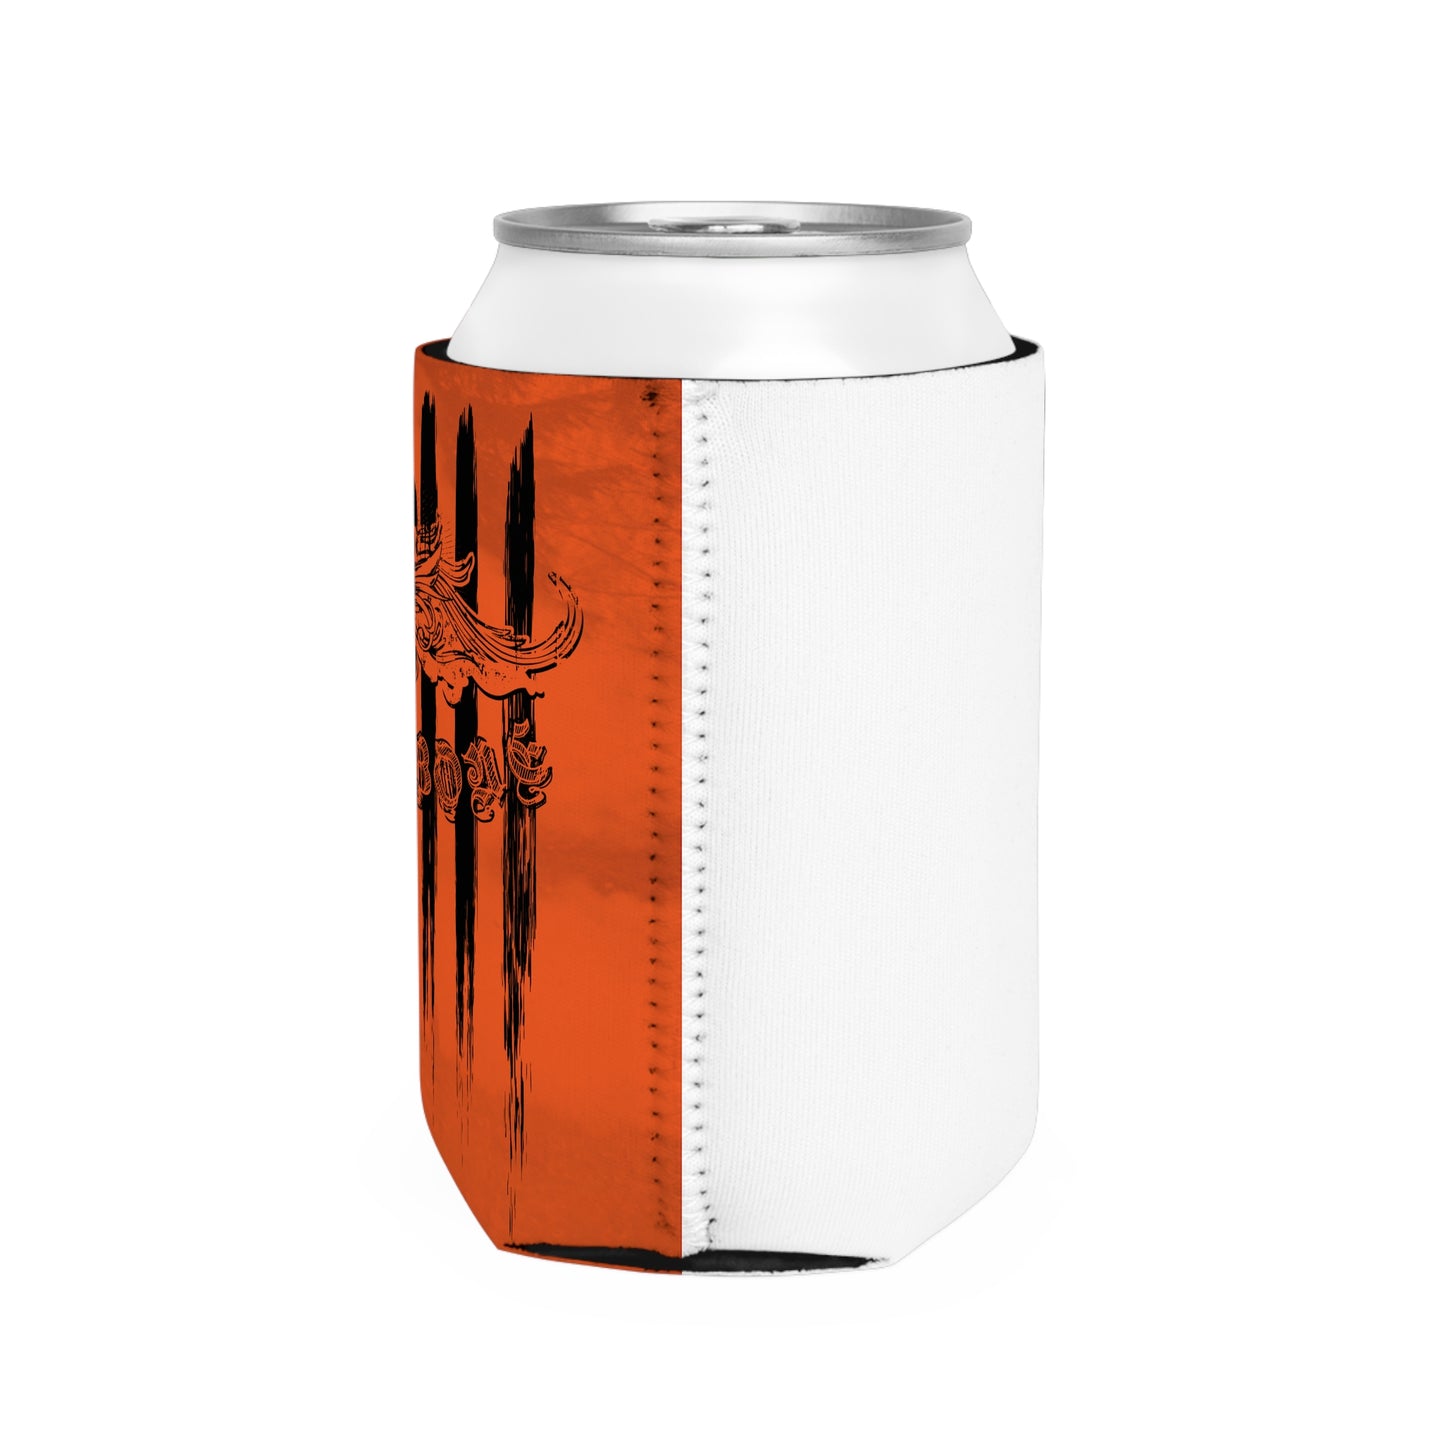 Tannerite® 2A to the Bone - Can Cooler Sleeve